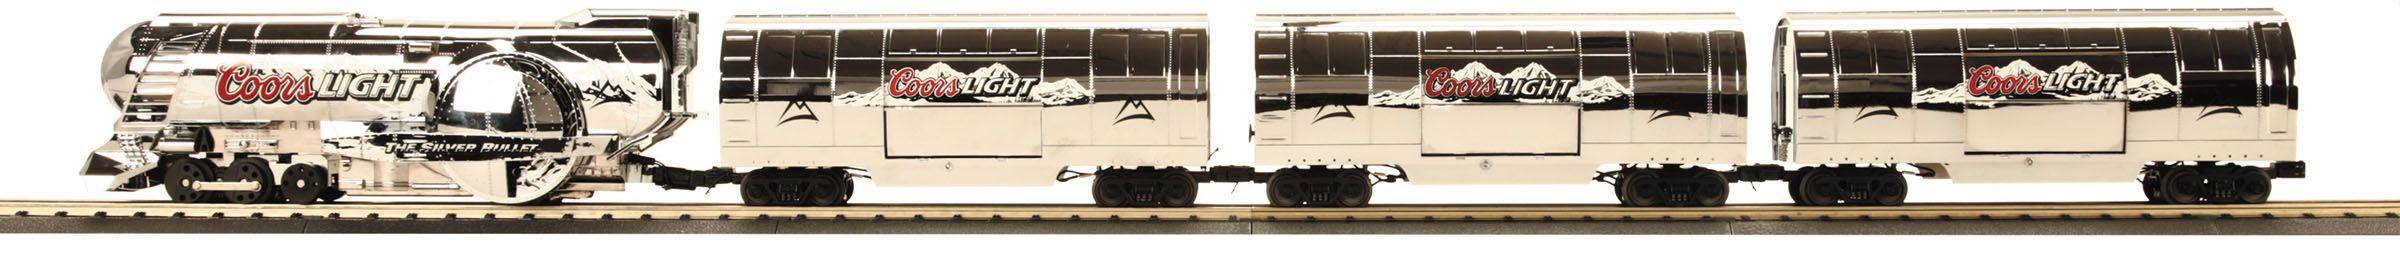 Coors Light Train Logo - 30 1433 1. MTH ELECTRIC TRAINS